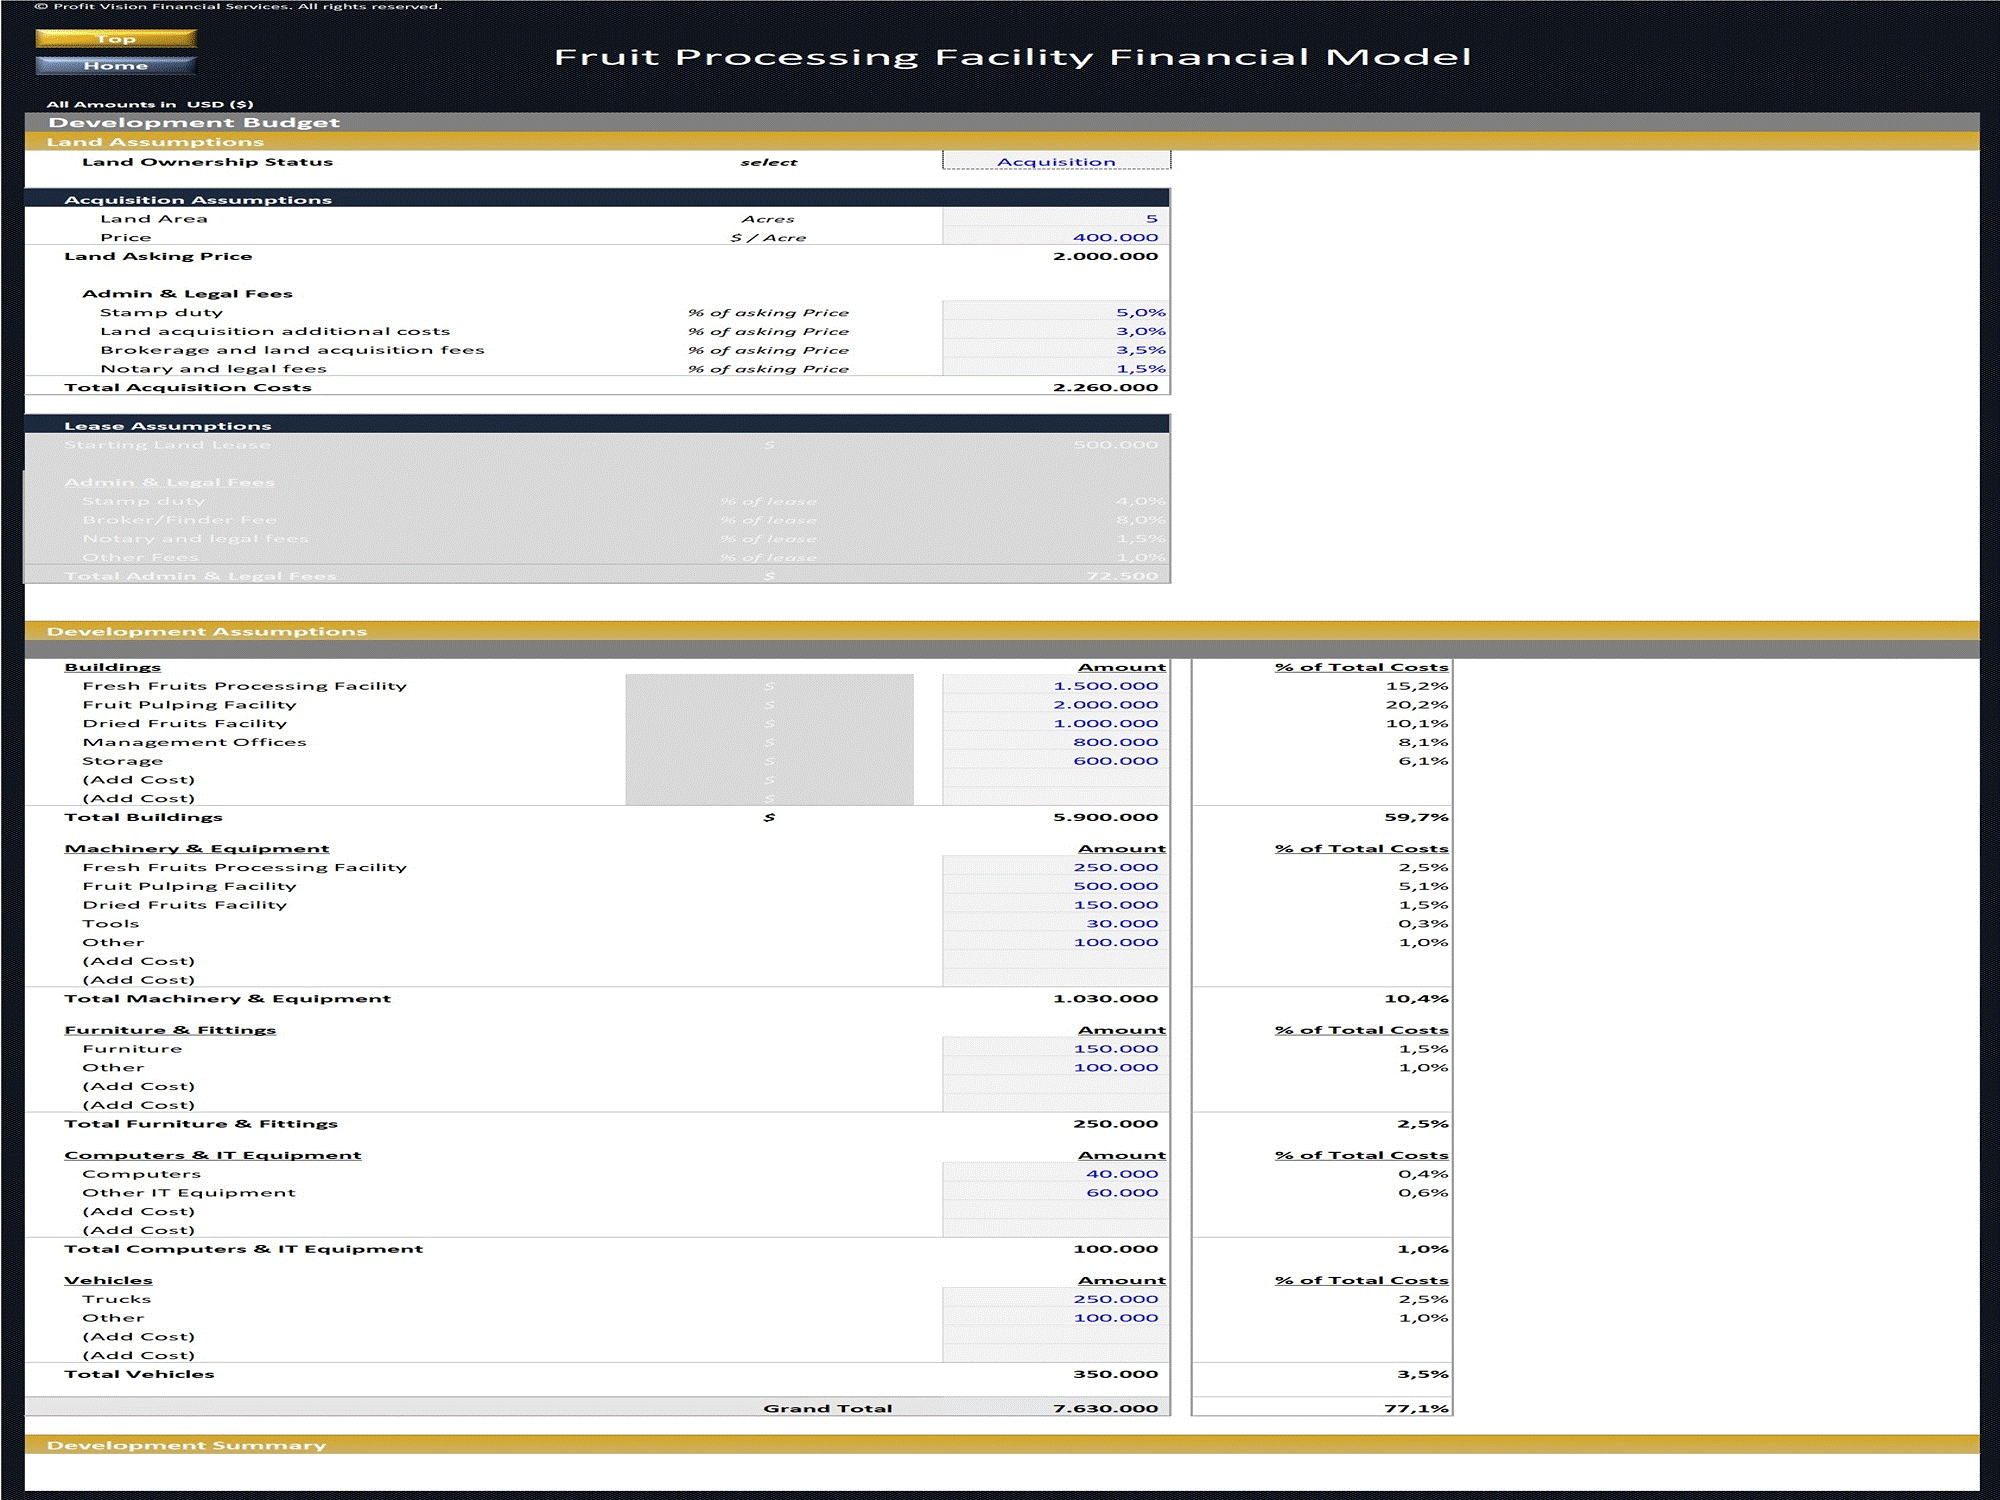 Fruit Processing Facility - 10 Year Financial Model (Excel template (XLSX)) Preview Image